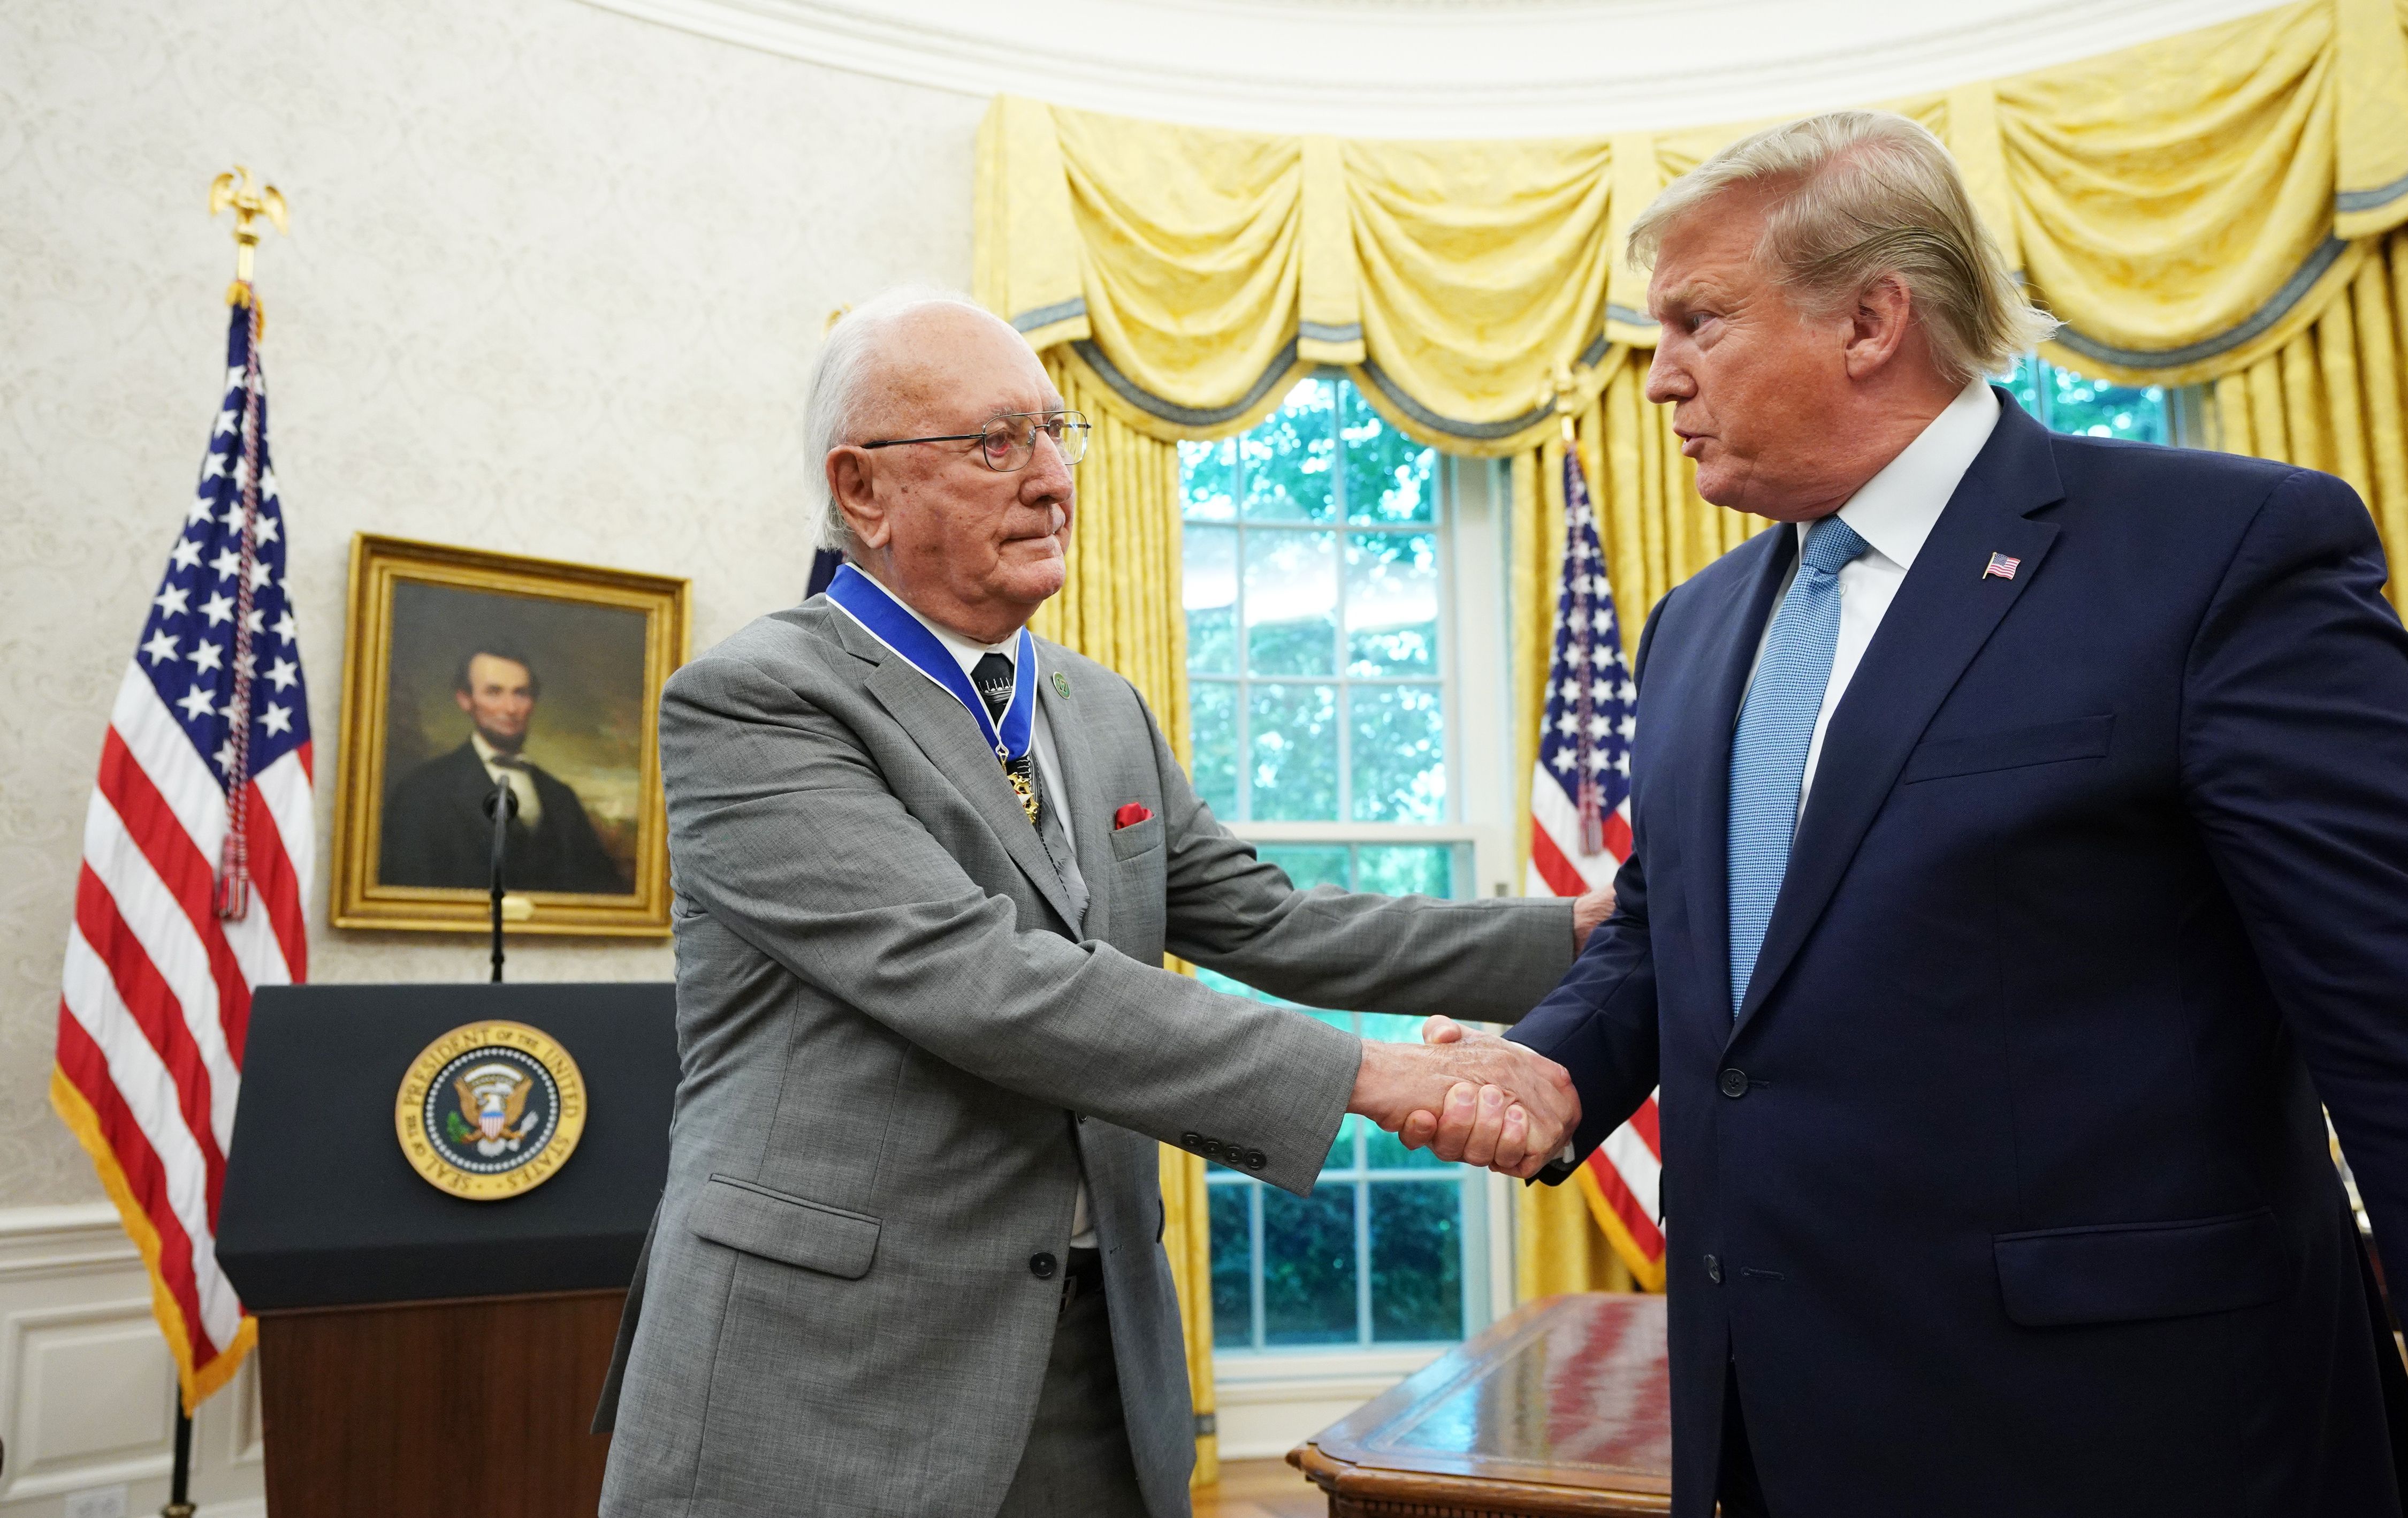 Trump awards Presidential Medal of Freedom to NBA great Bob Cousy